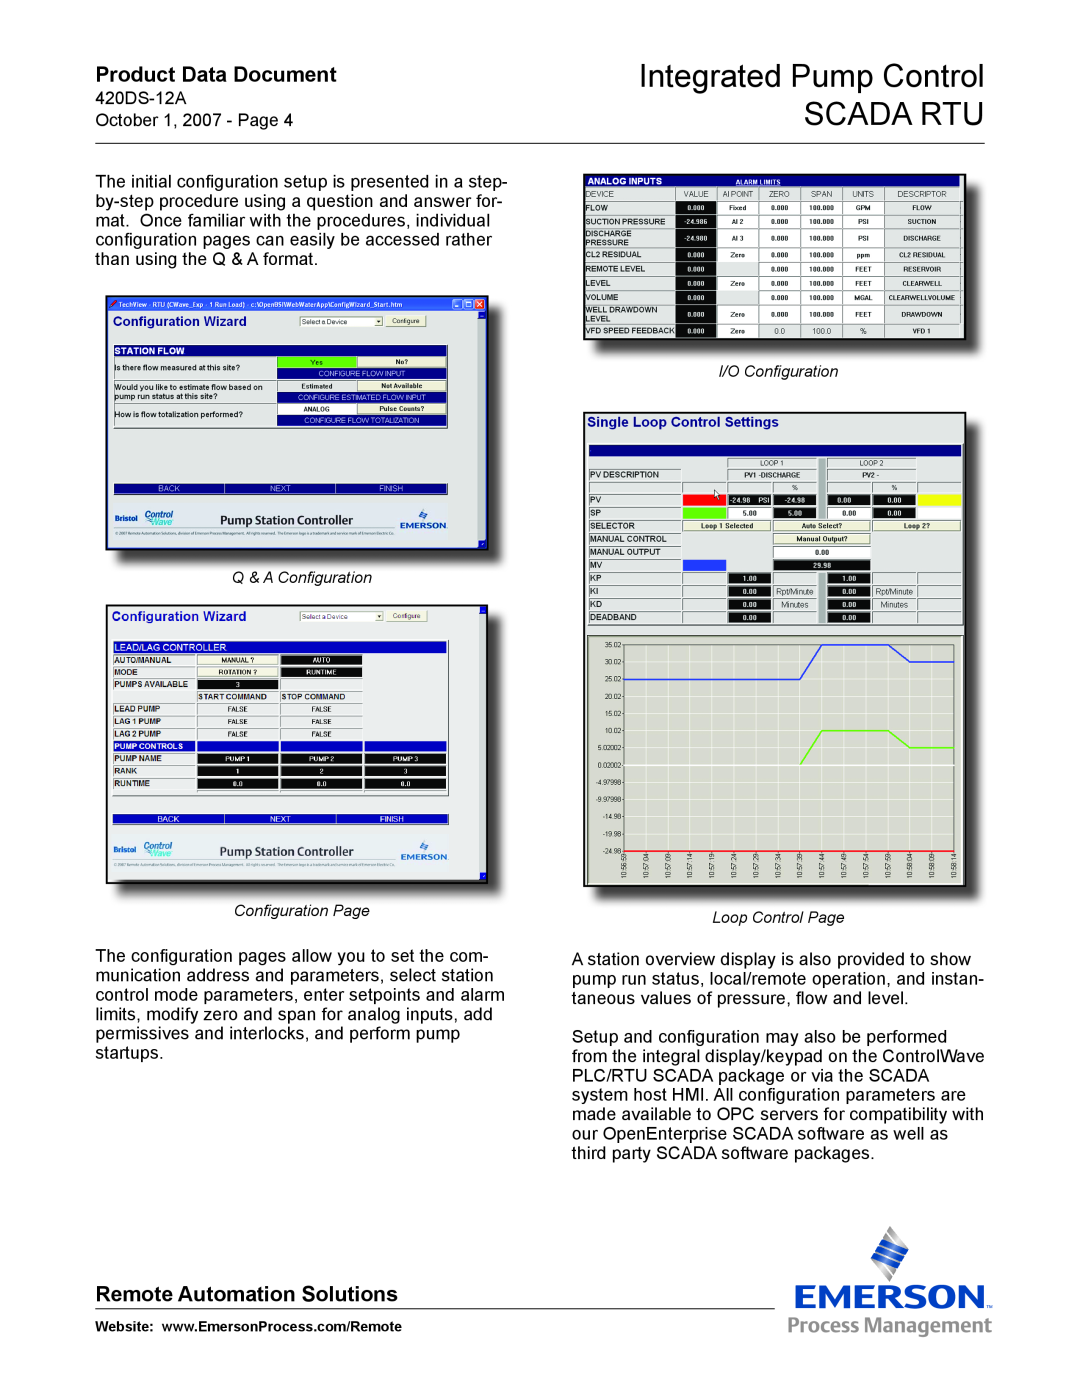 Emerson Process Management manual Integrated Pump Control SCADA RTU, Product Data Document, Remote Automation Solutions 